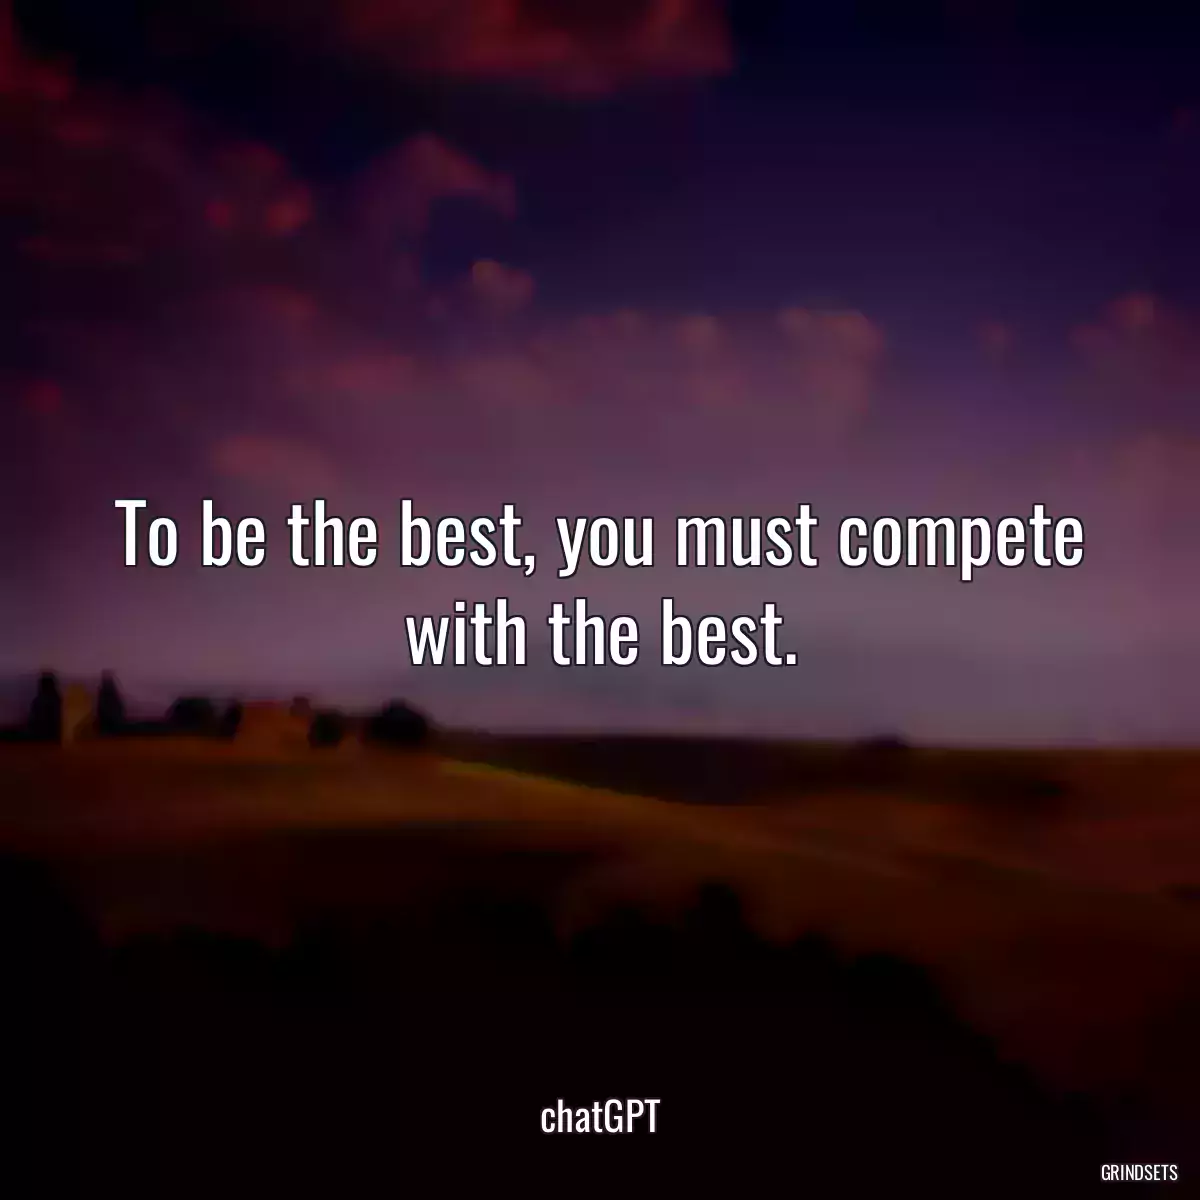 To be the best, you must compete with the best.